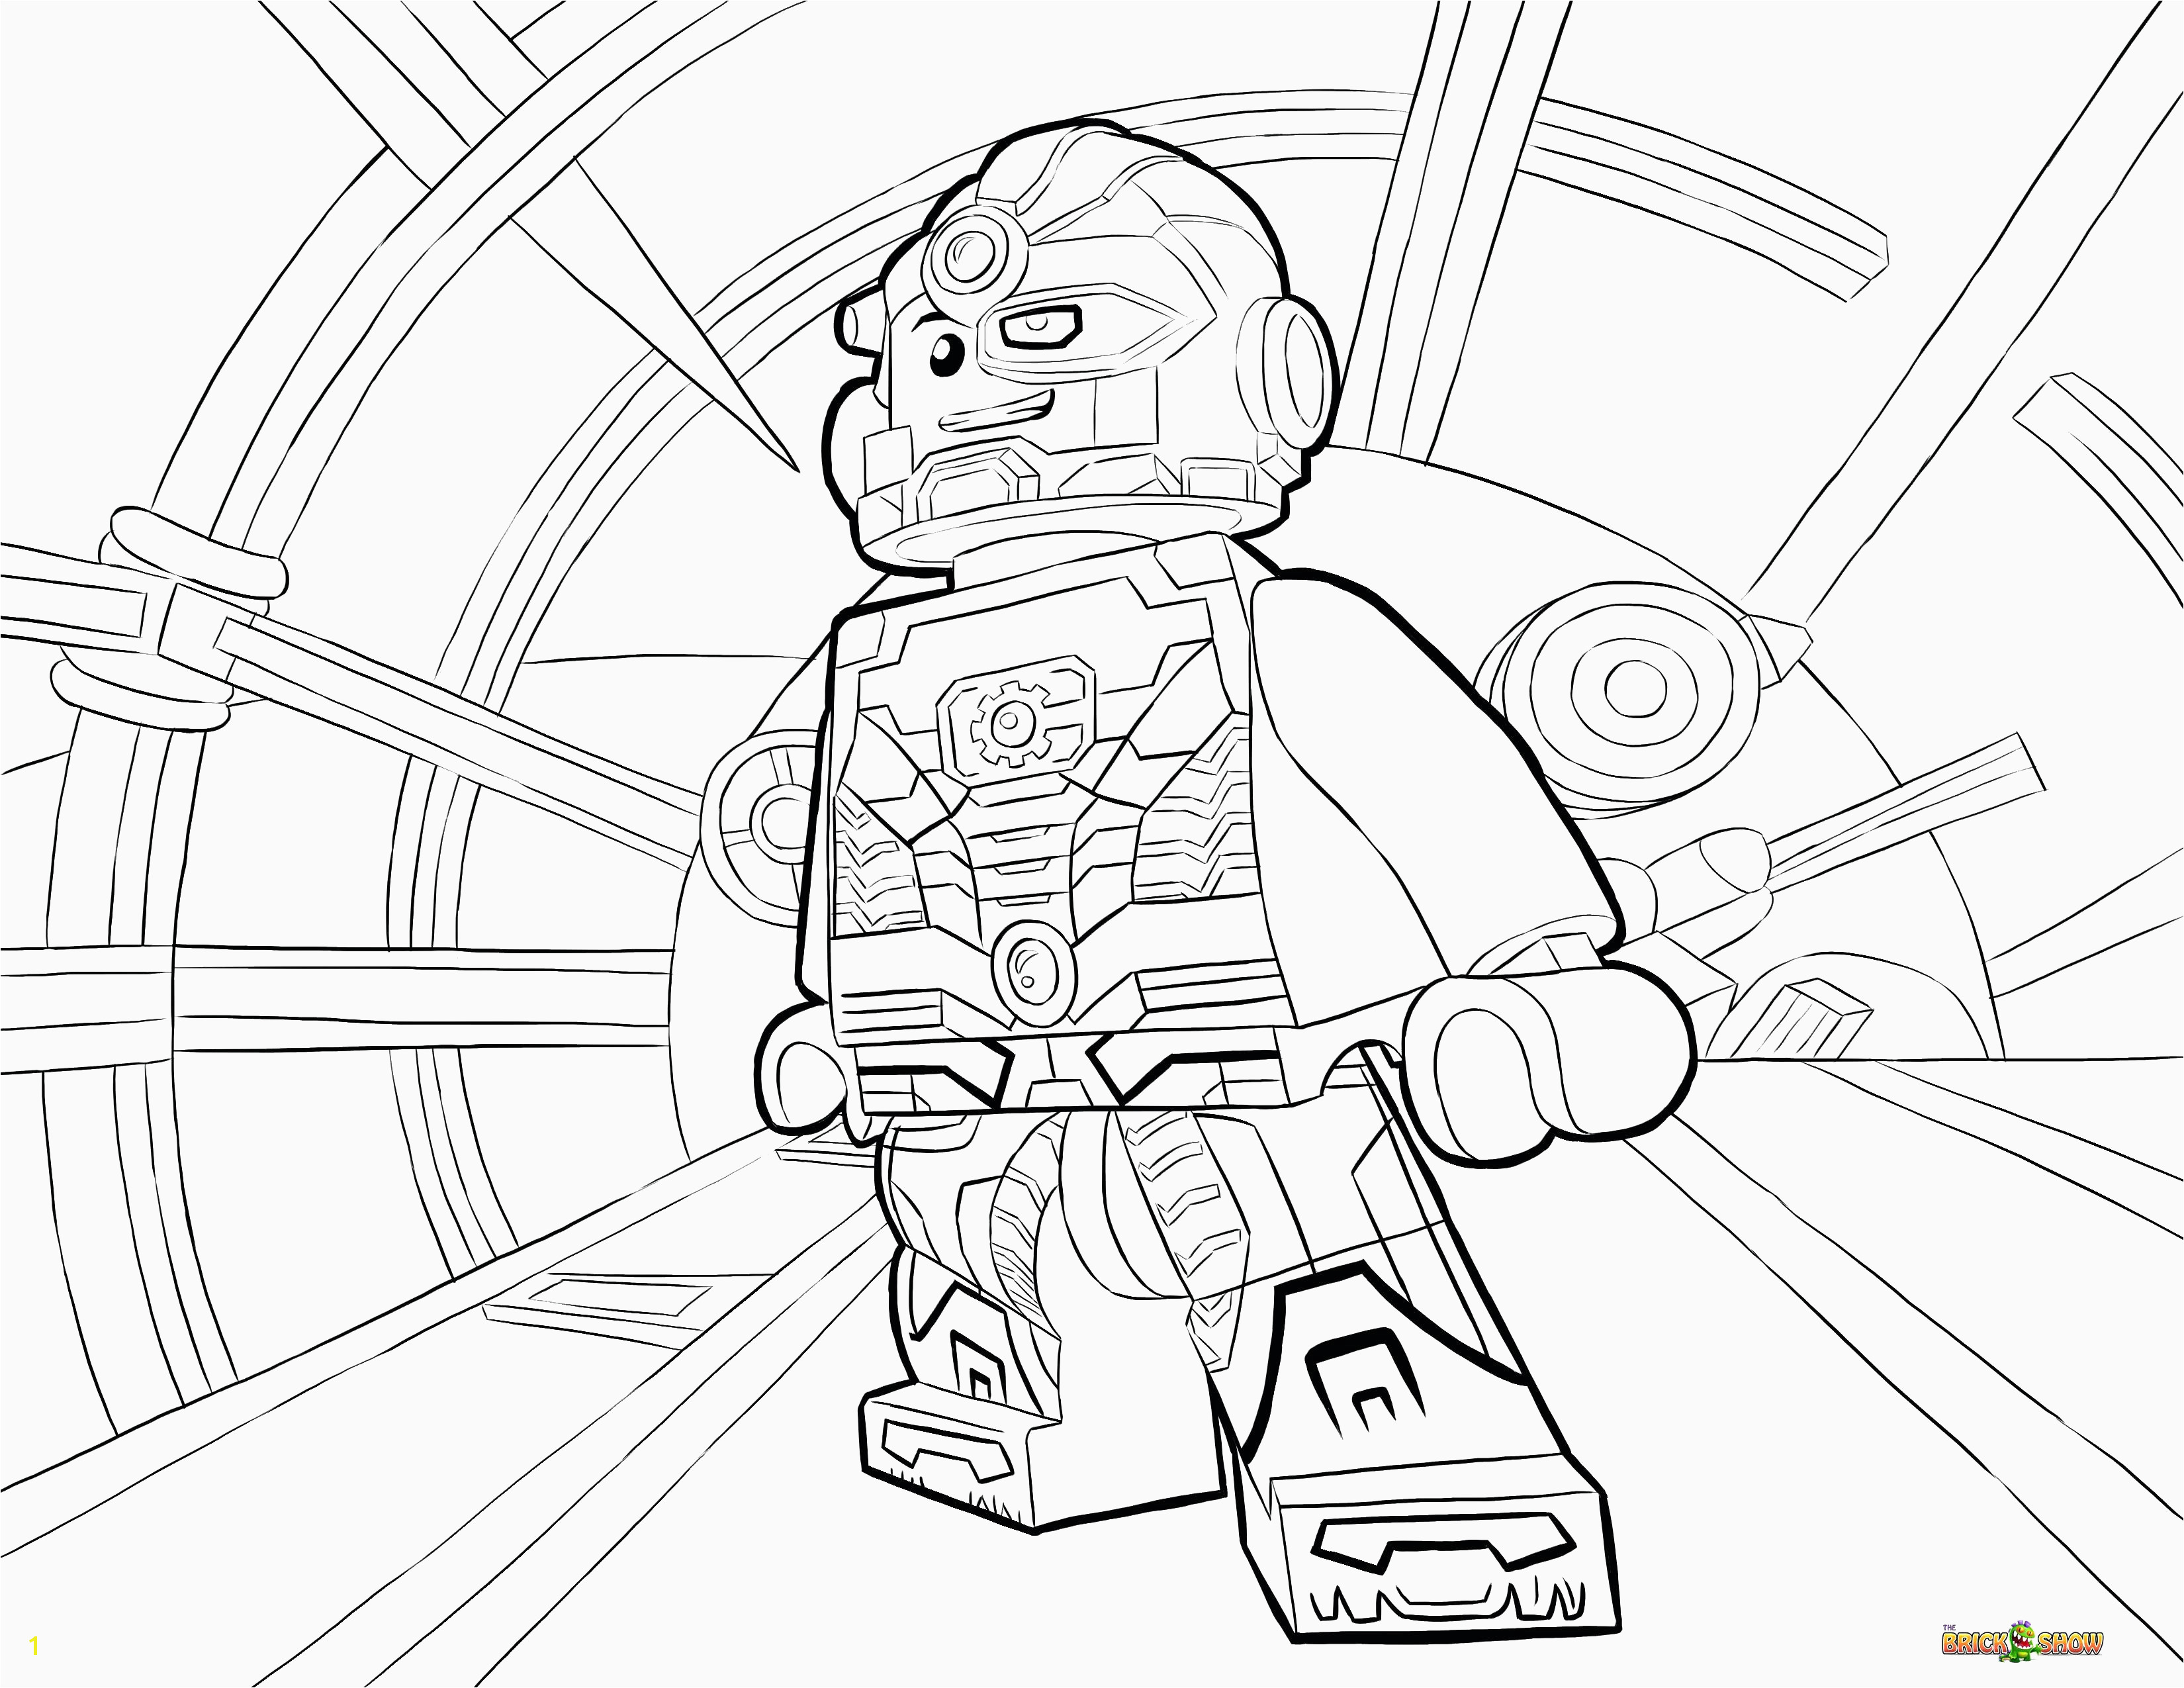 Free Lego Coloring Pages Superhero Coloring Pages Gallery thephotosync